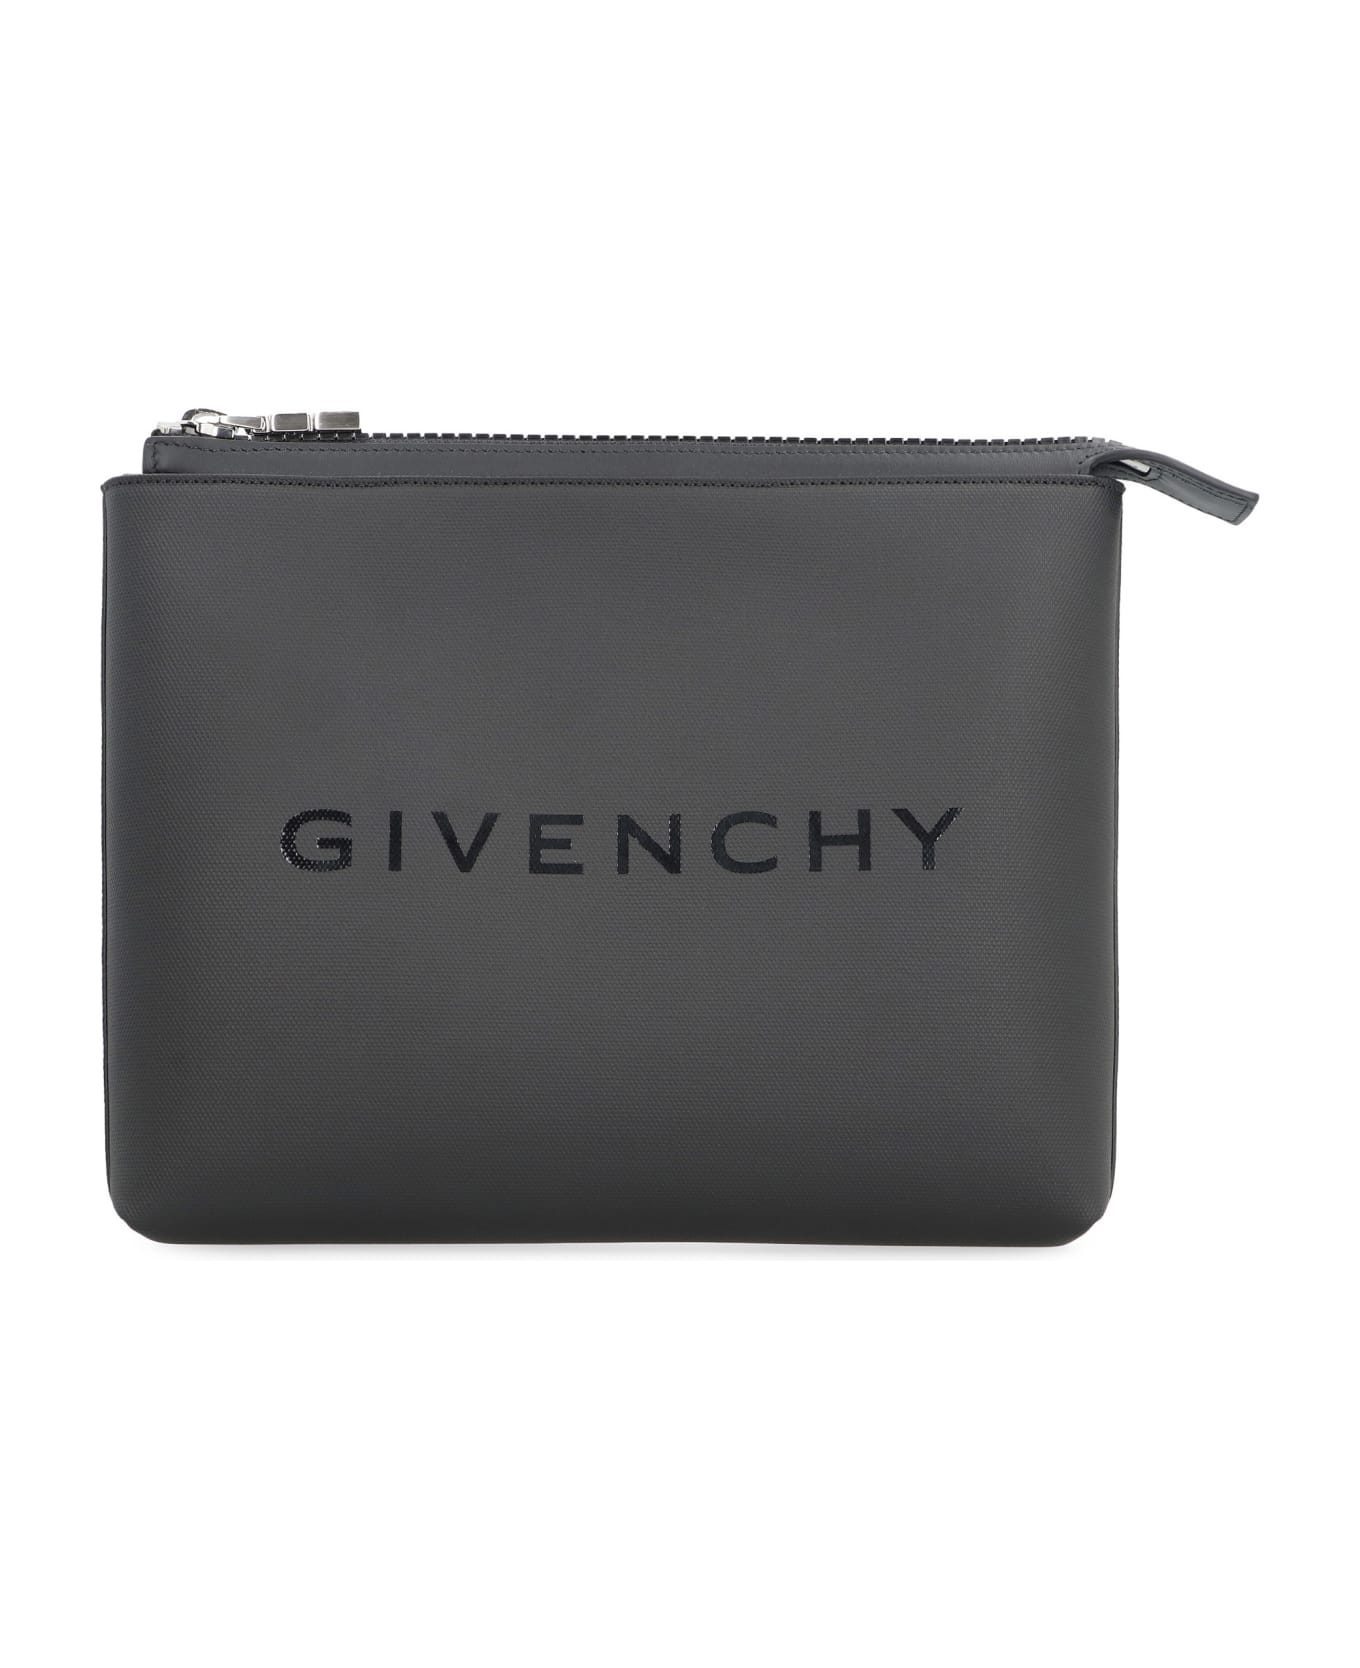 Givenchy Coated Canvas Flat Pouch - Black トラベルバッグ